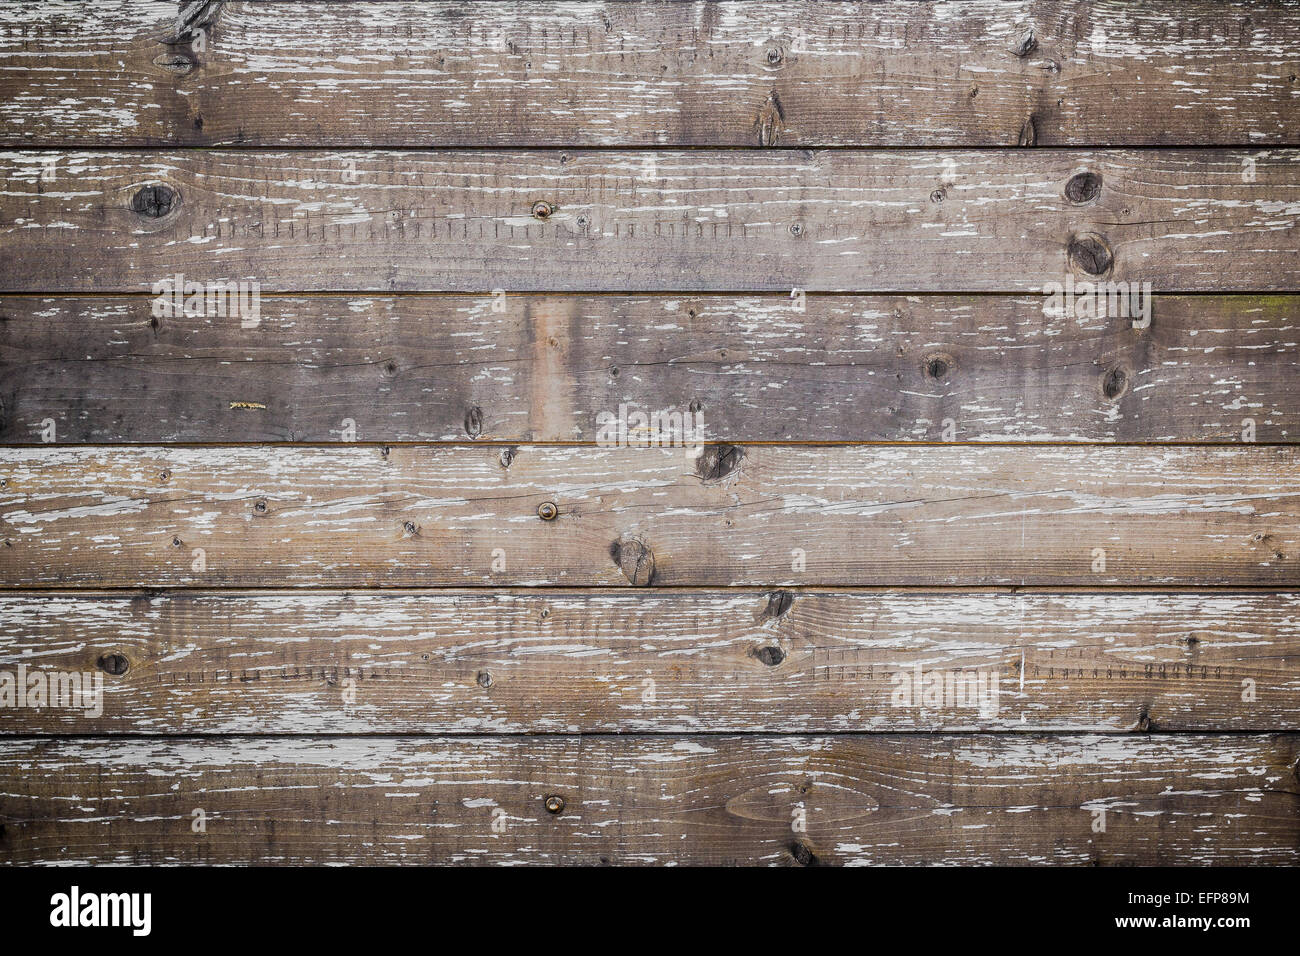 Planks of wood damaged by the aging process. Stock Photo